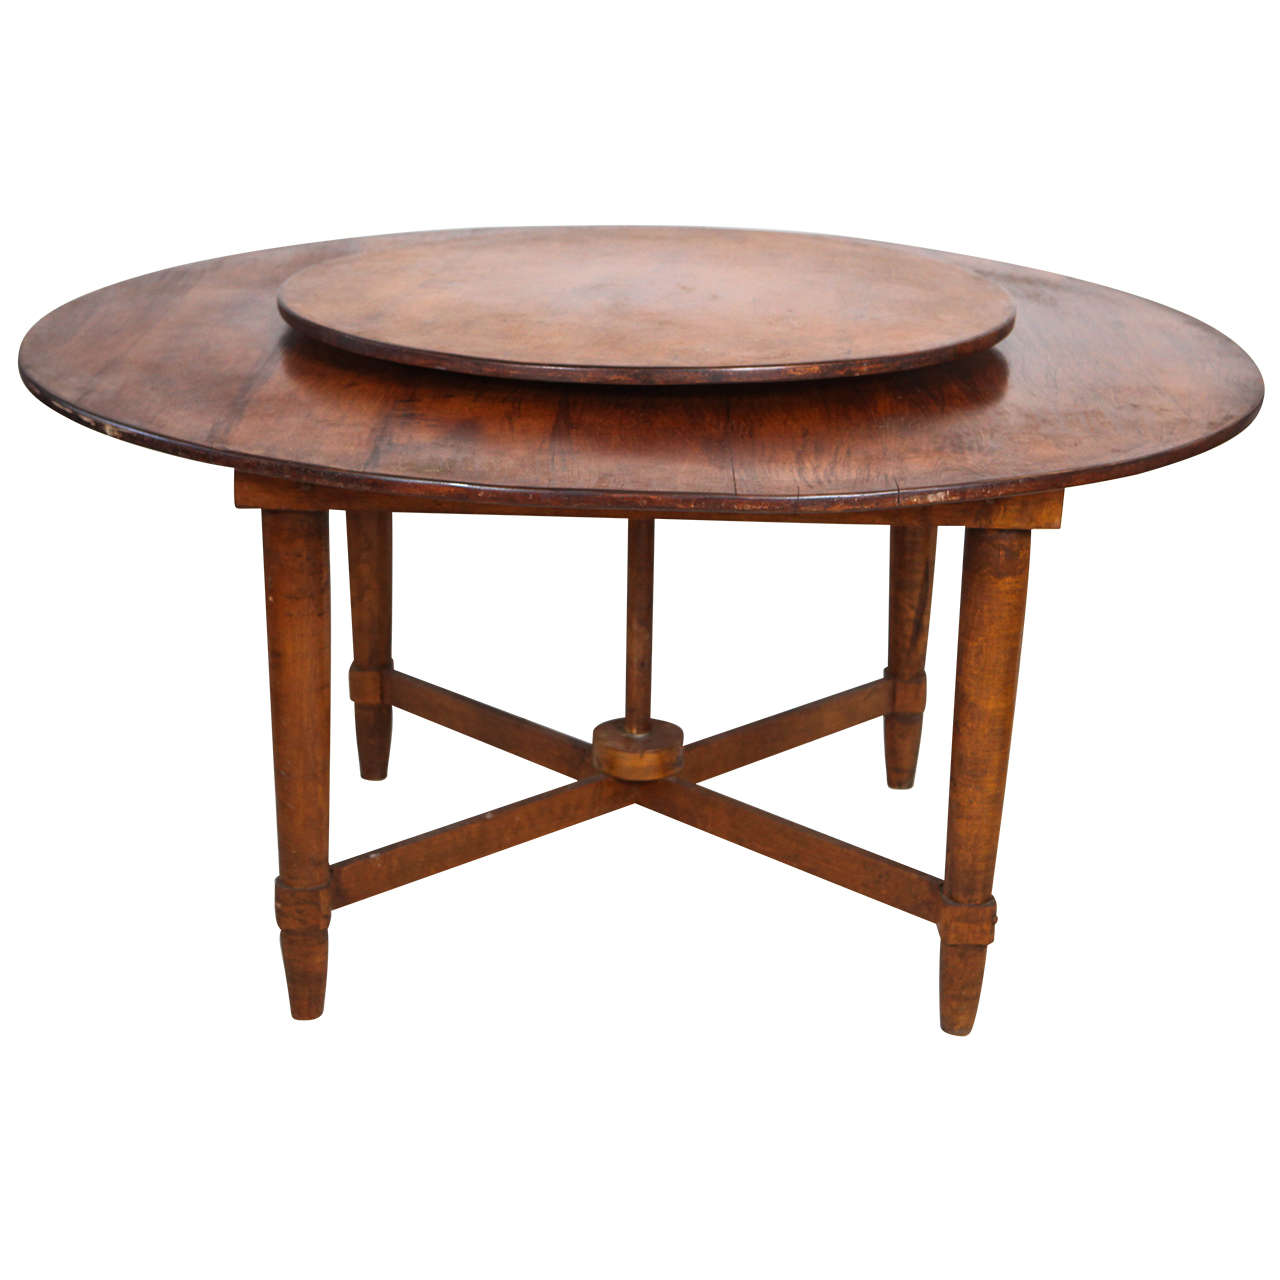 Distinct Rustic Round Dining Table With, Round Dining Room Table With Built In Lazy Susan